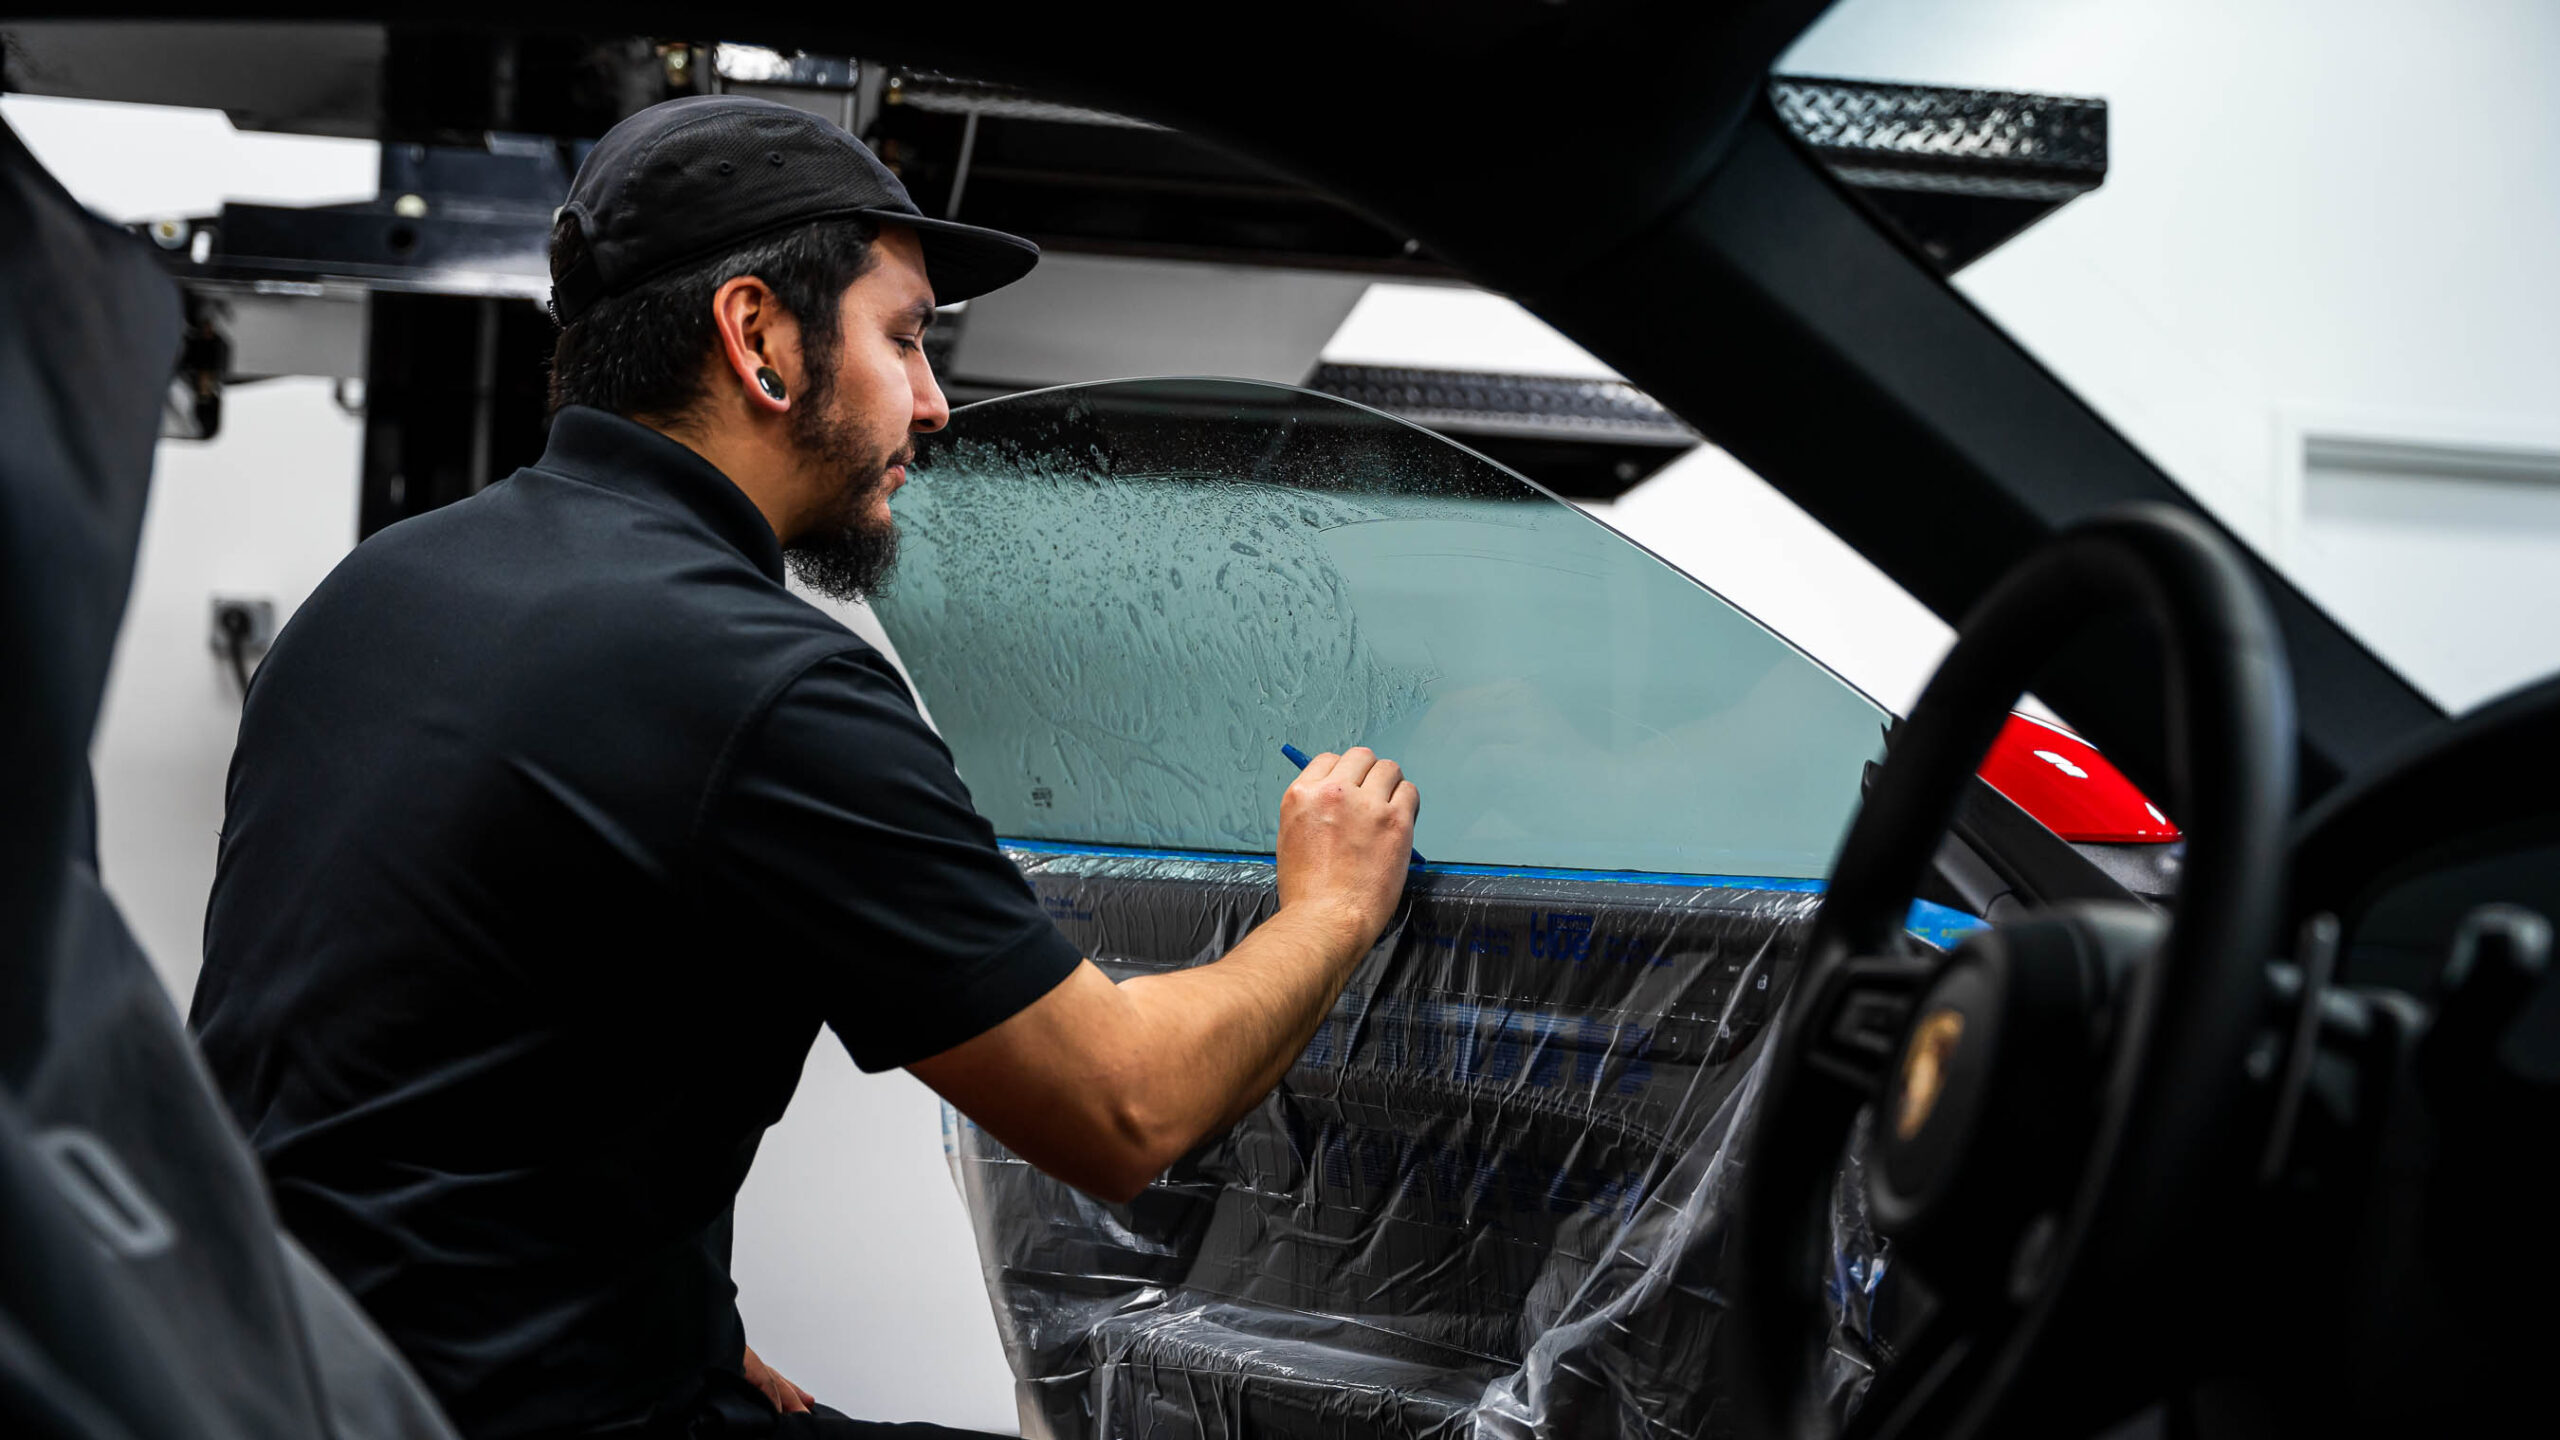 Installing tint with a squeegee